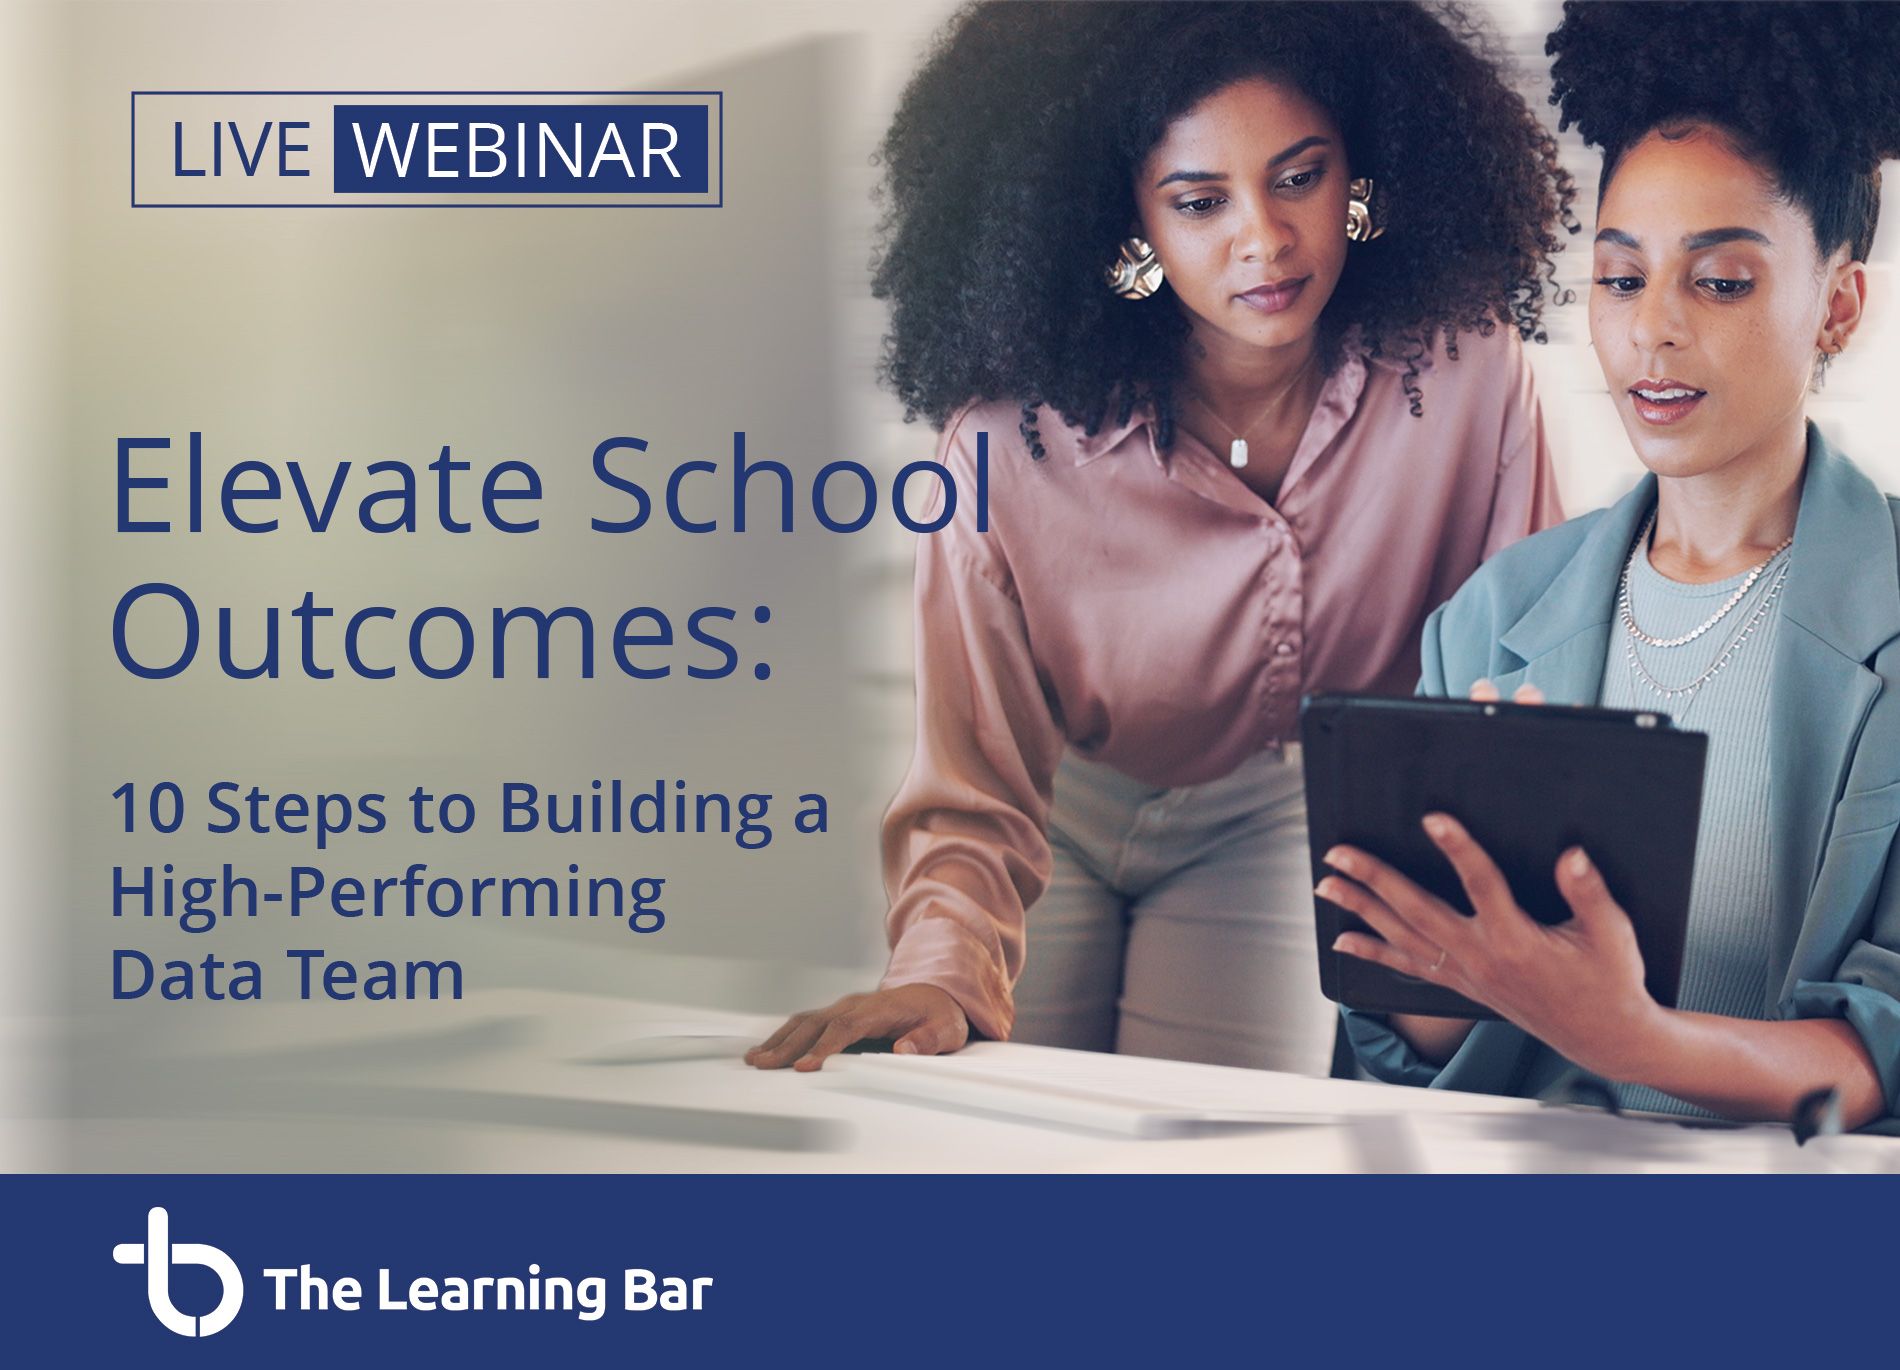 ACCESS WEBINAR: Elevate School Outcomes: 10 Steps to Building a High-Performing Data Team